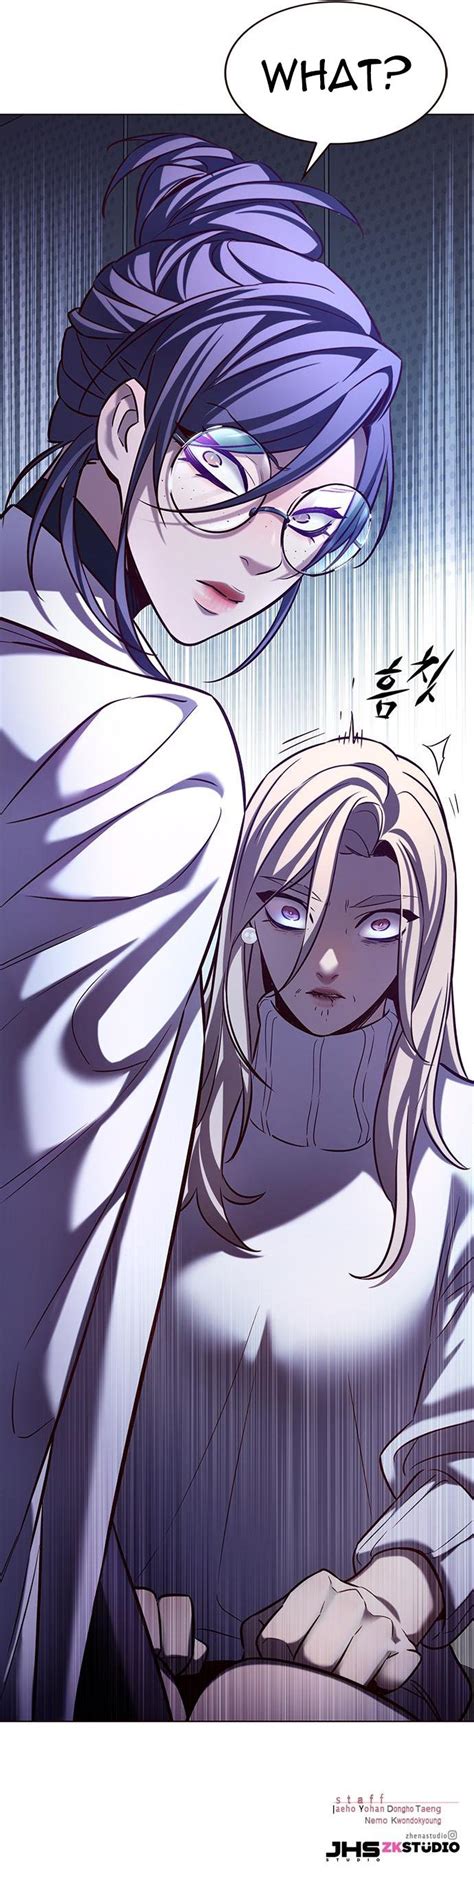 Eleceed (일렉시드) is a manhwa that is written by Son Je-Ho and illustrated by ZHENA. It is published on Naver Webtoon (Korean) as well as Webtoon (English). Its first chapter was published in the Korean Naver website on October 2, 2018. Son Jae Ho’s past works include Webtoons Noblesse, Noblesse: Rai’s Adventure, and Ability..